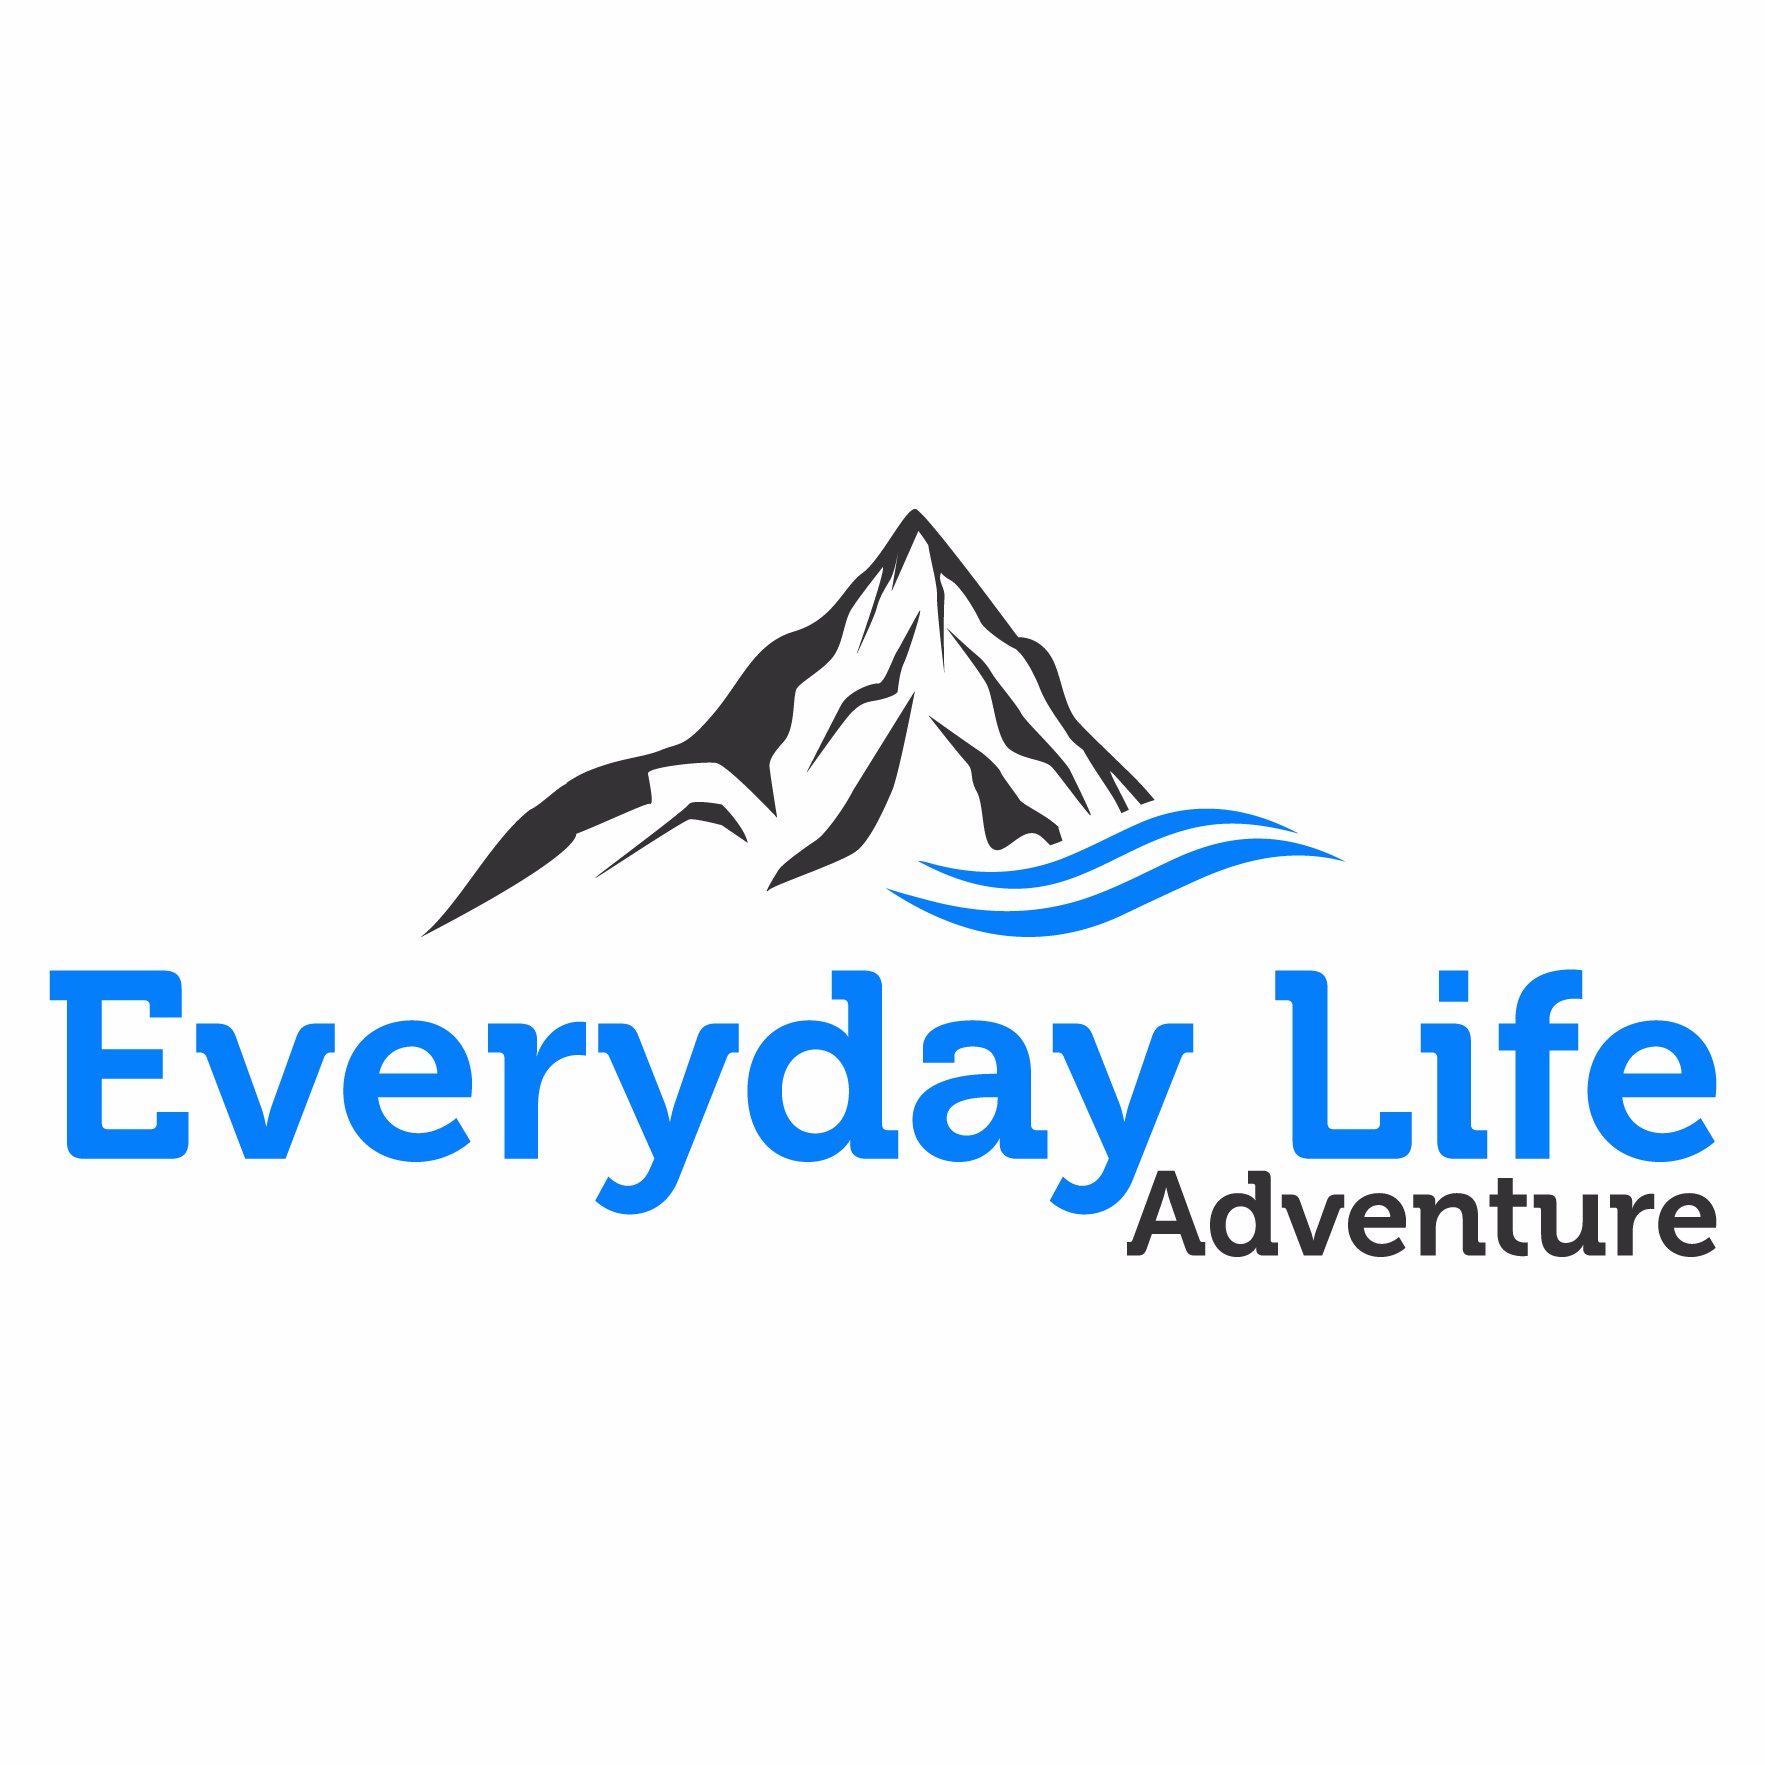 Hello Twitter! Everyday Life Adventure is here to inspire YOU to create adventure and live YOUR life to the fullest every day.